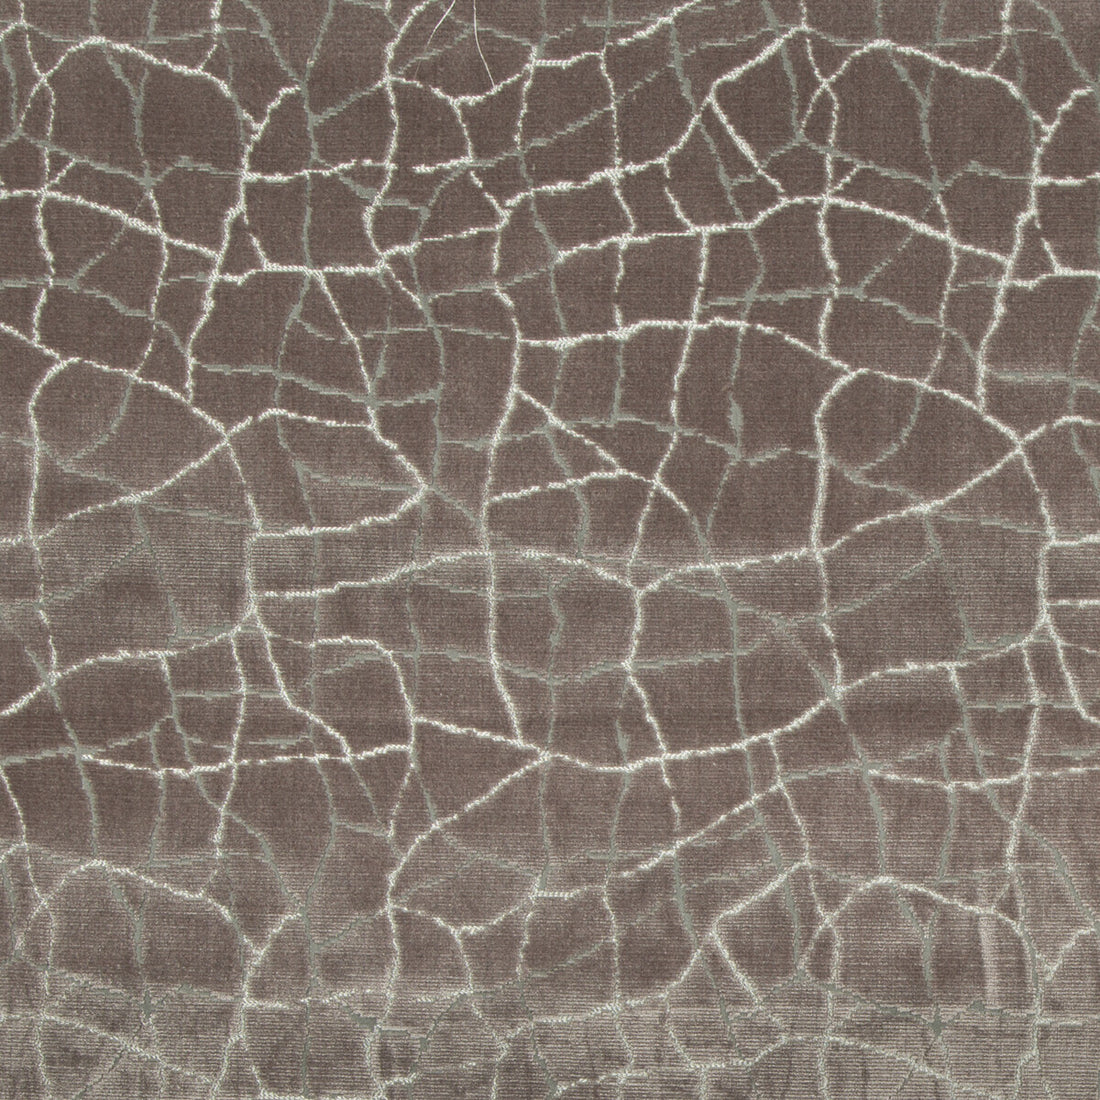 Formation fabric in mink color - pattern 34780.21.0 - by Kravet Couture in the Artisan Velvets collection